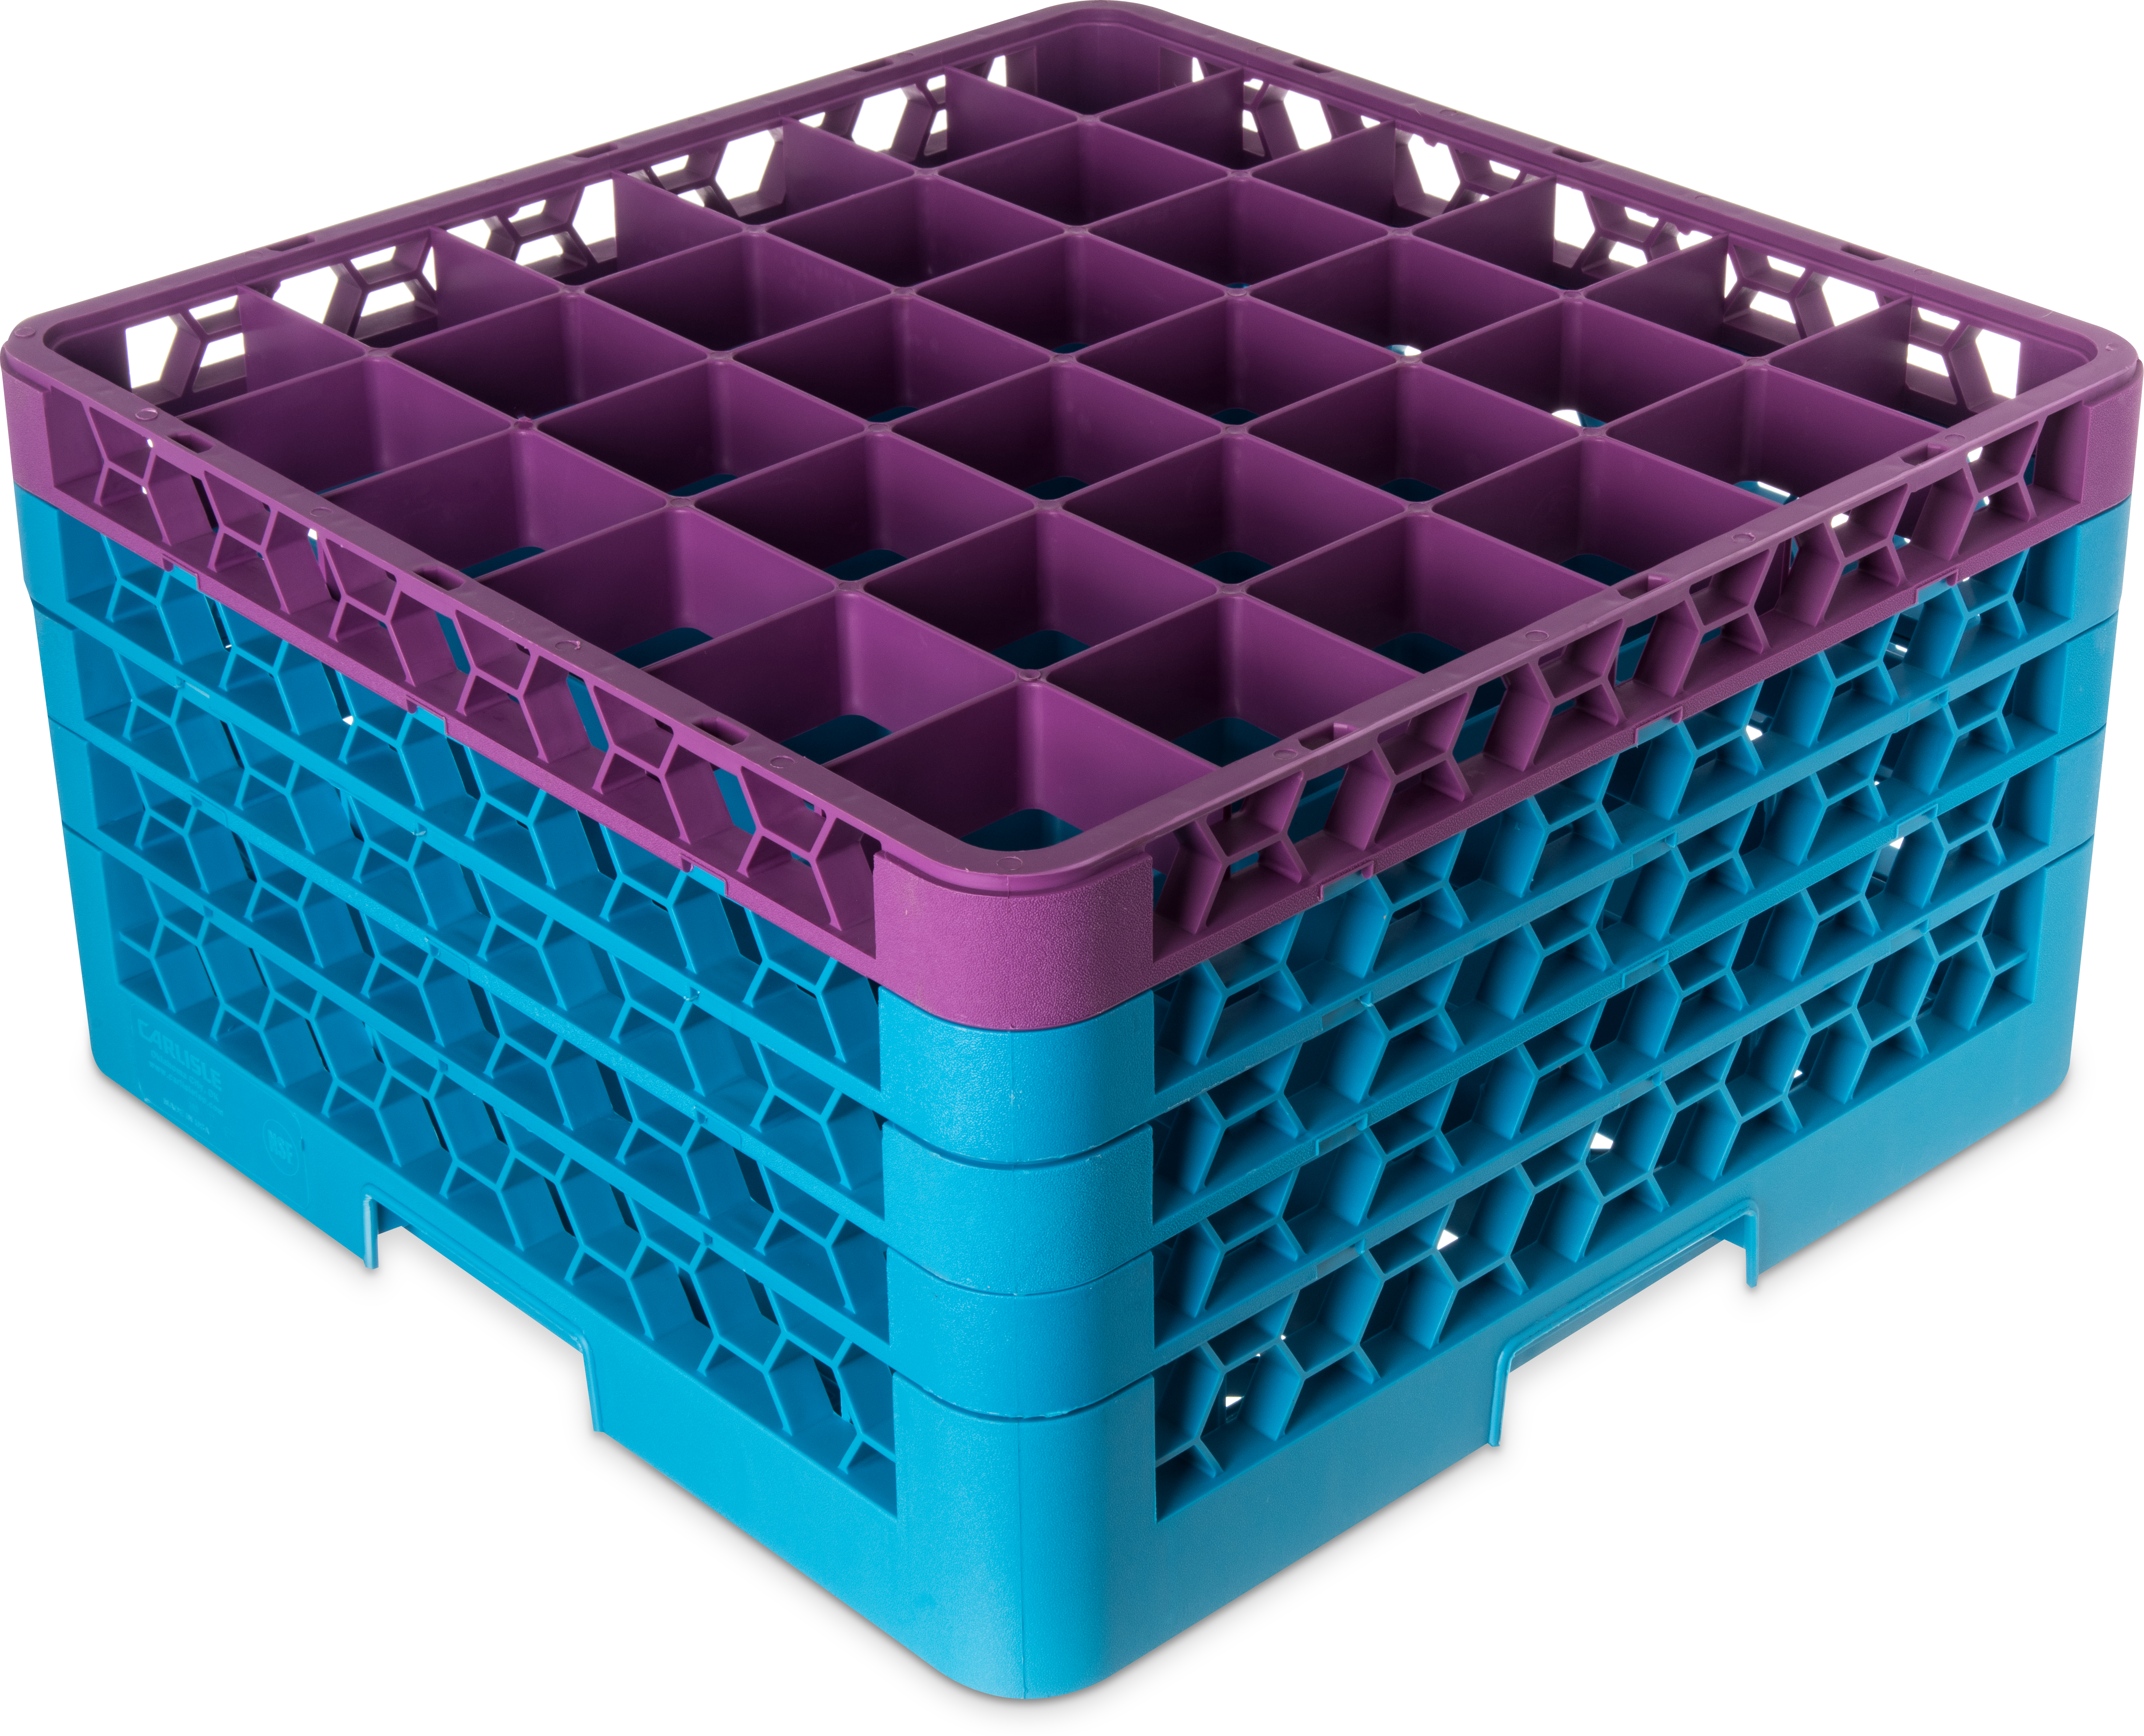 OptiClean 36 Compartment Glass Rack with 4 Extenders 10.3 - Lavender-Carlisle Blue